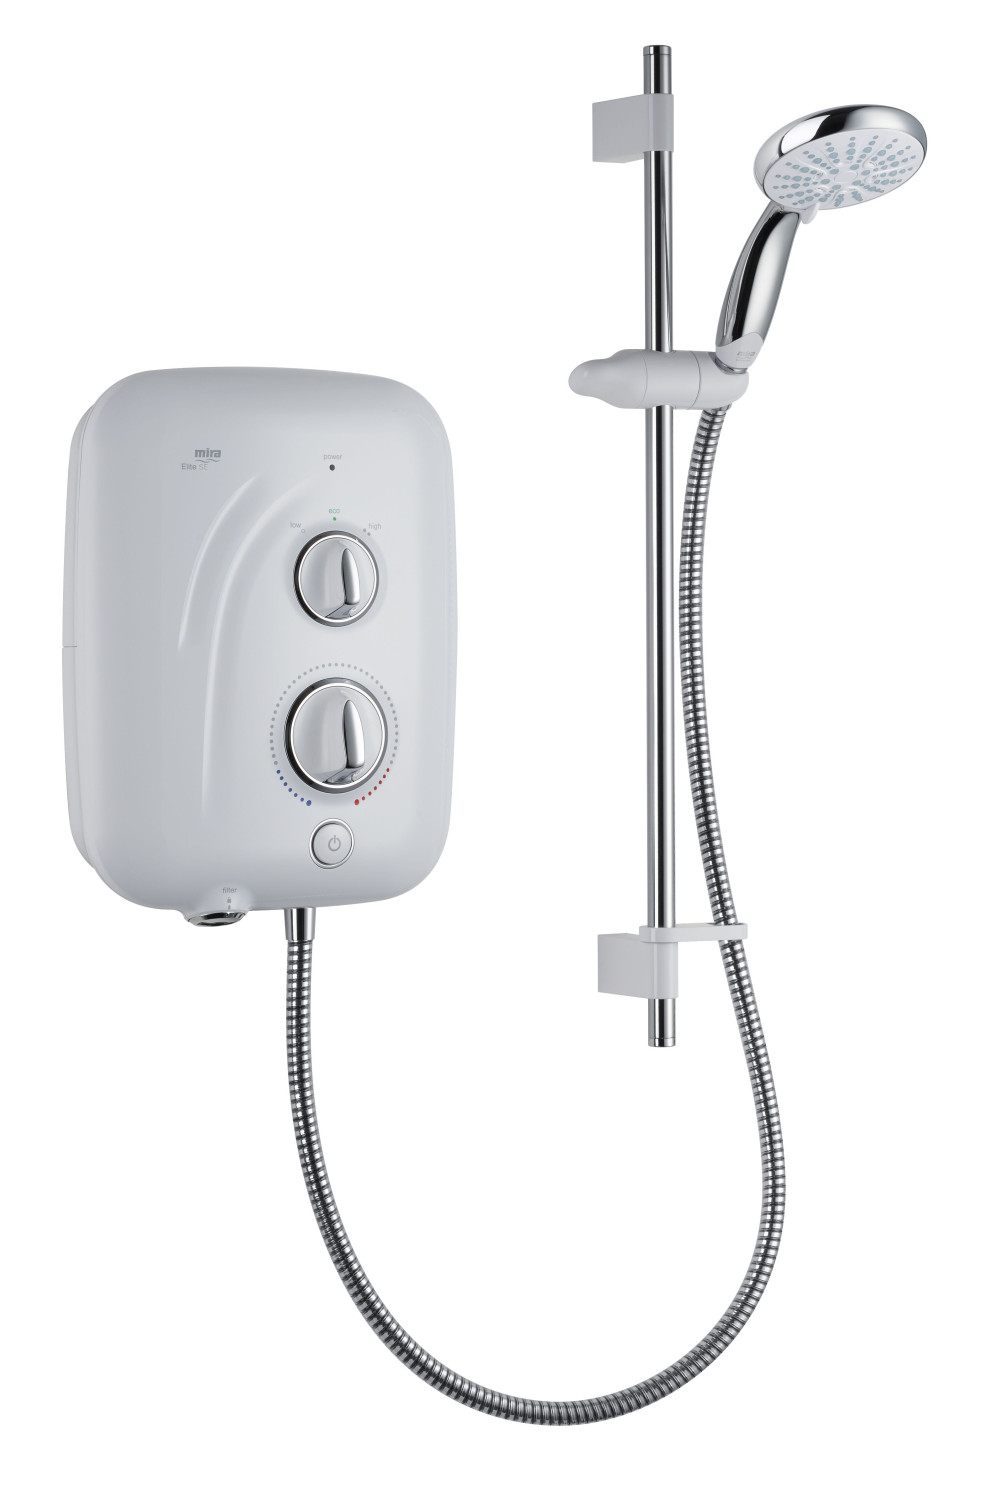 Mira Elite SE Pumped Electric Shower featured image